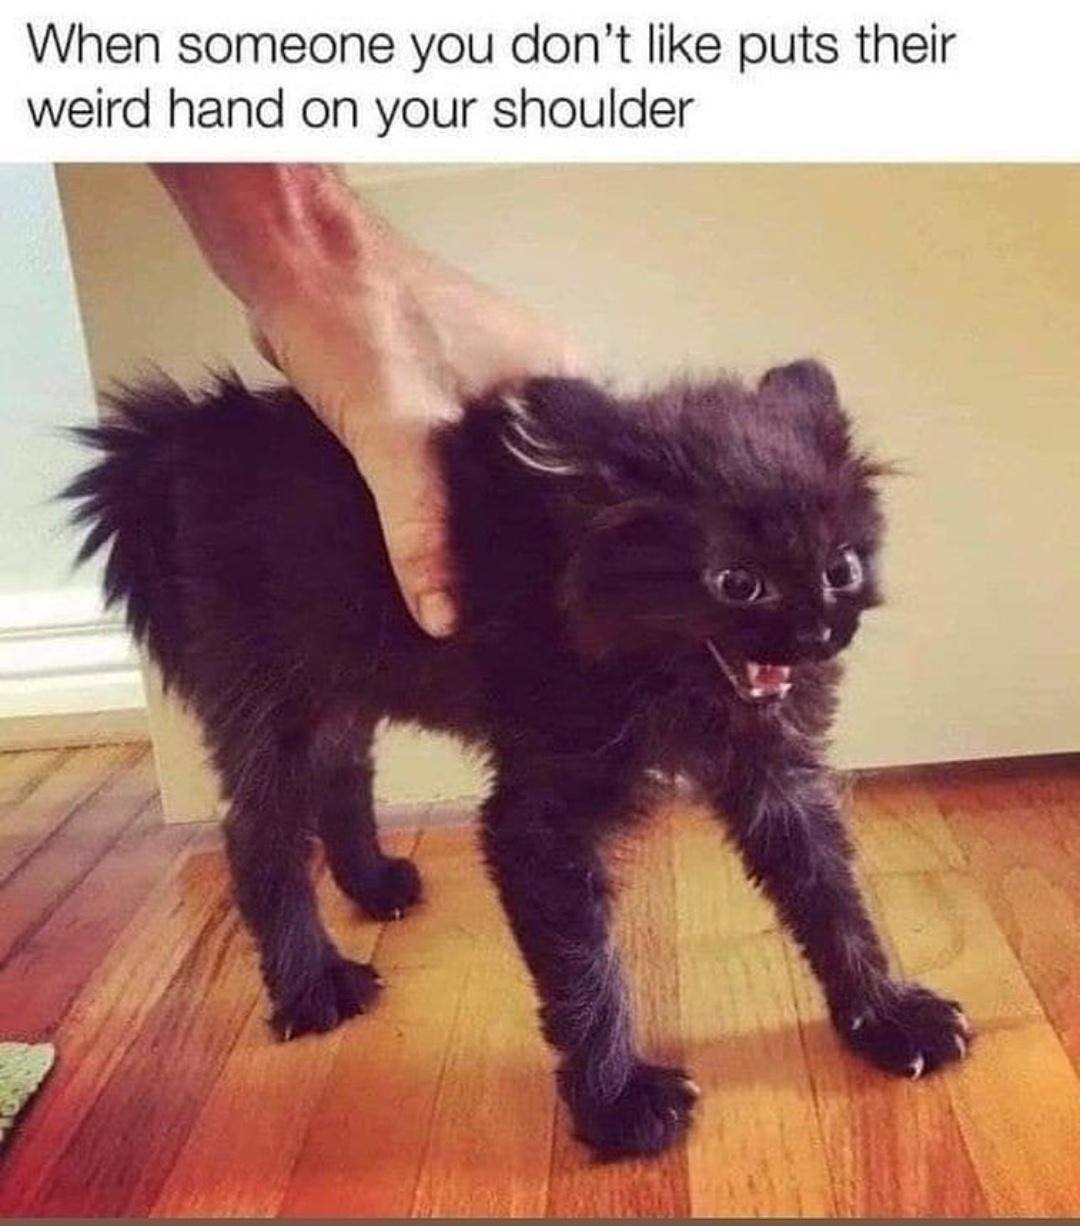 Cat Memes - When someone you don't puts their weird hand on your shoulder